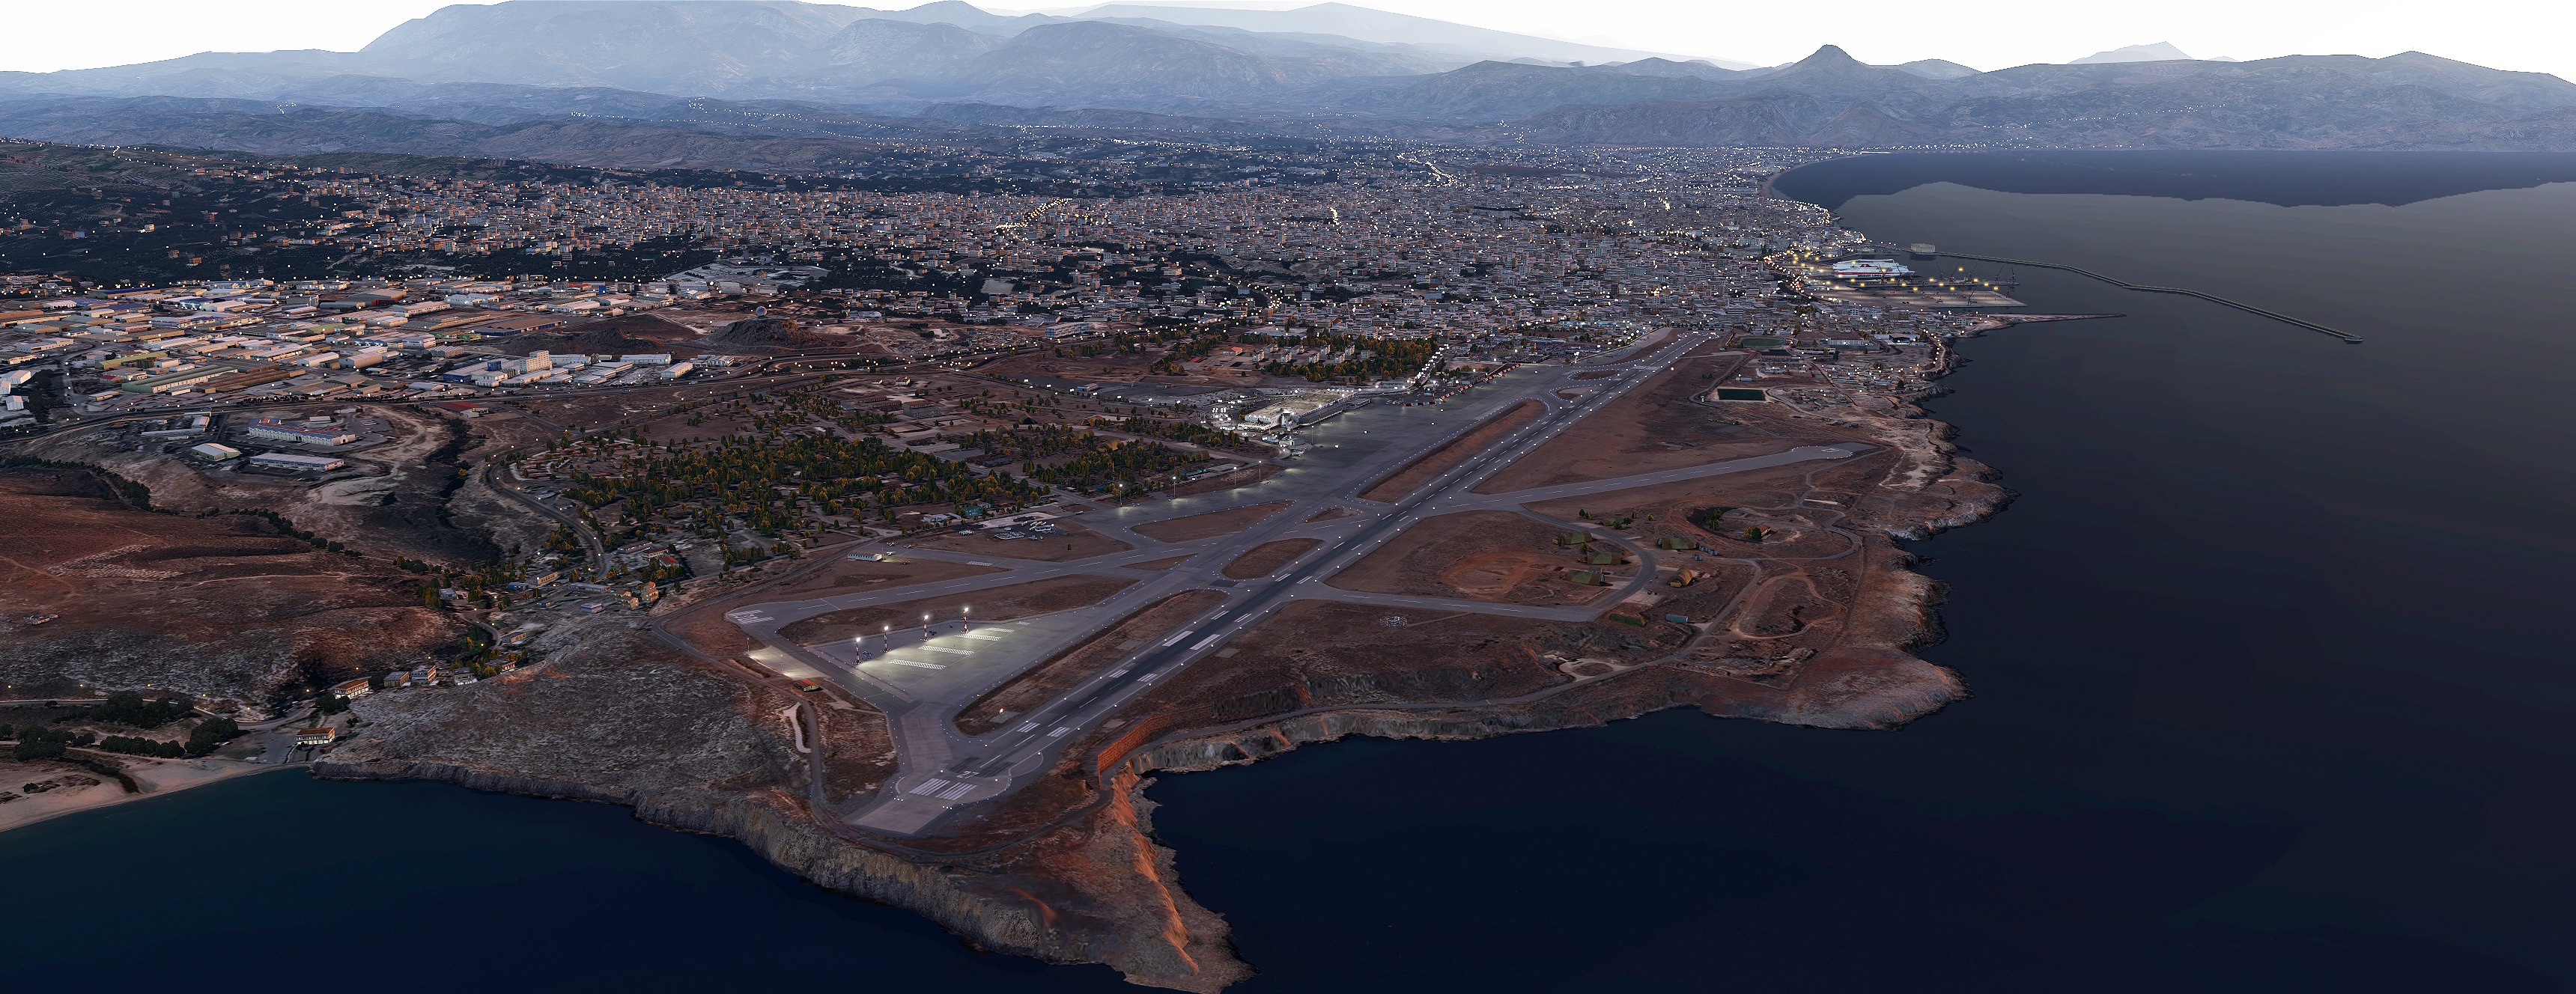 FlyTampa Releases Heraklion For X-Plane